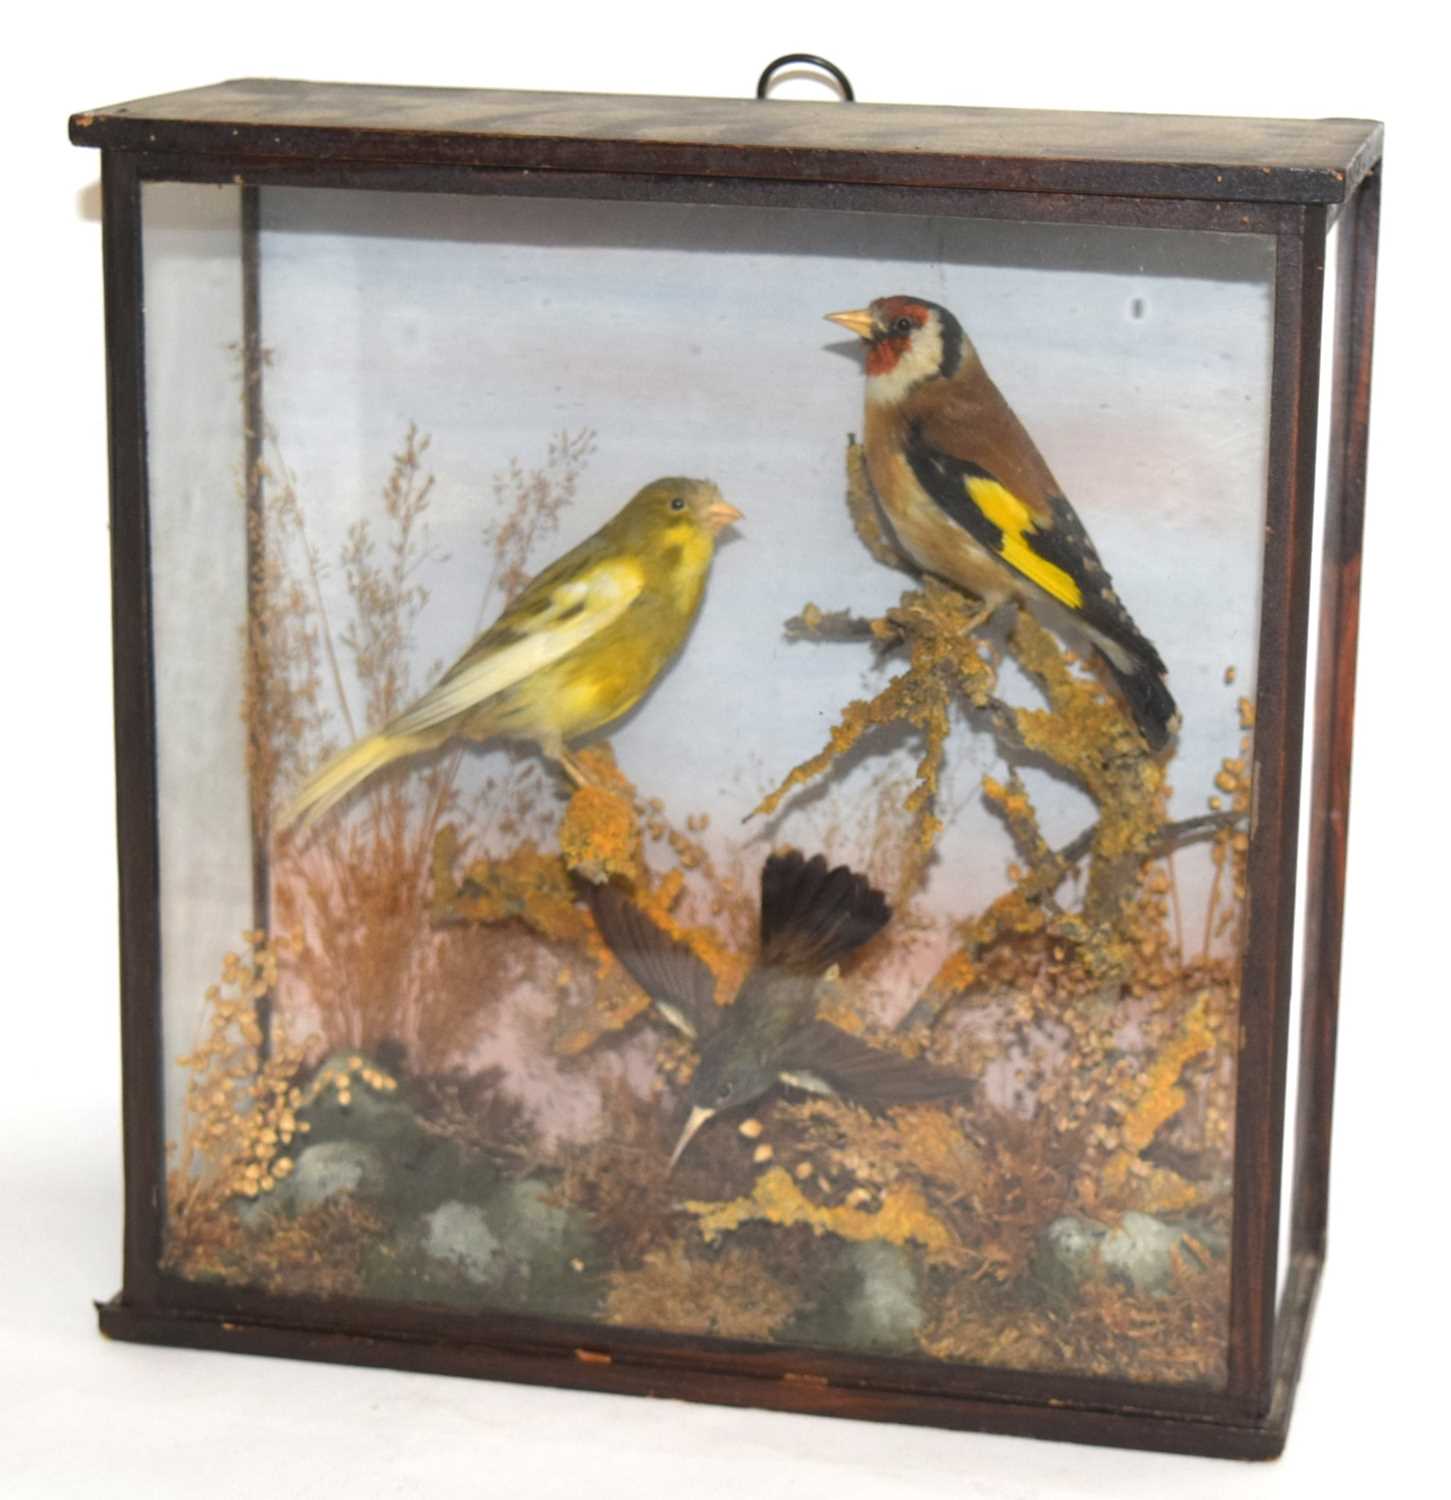 Late 19th /Early 20th century taxidermy naturalistic setting case of a gold finch, Canary, and a